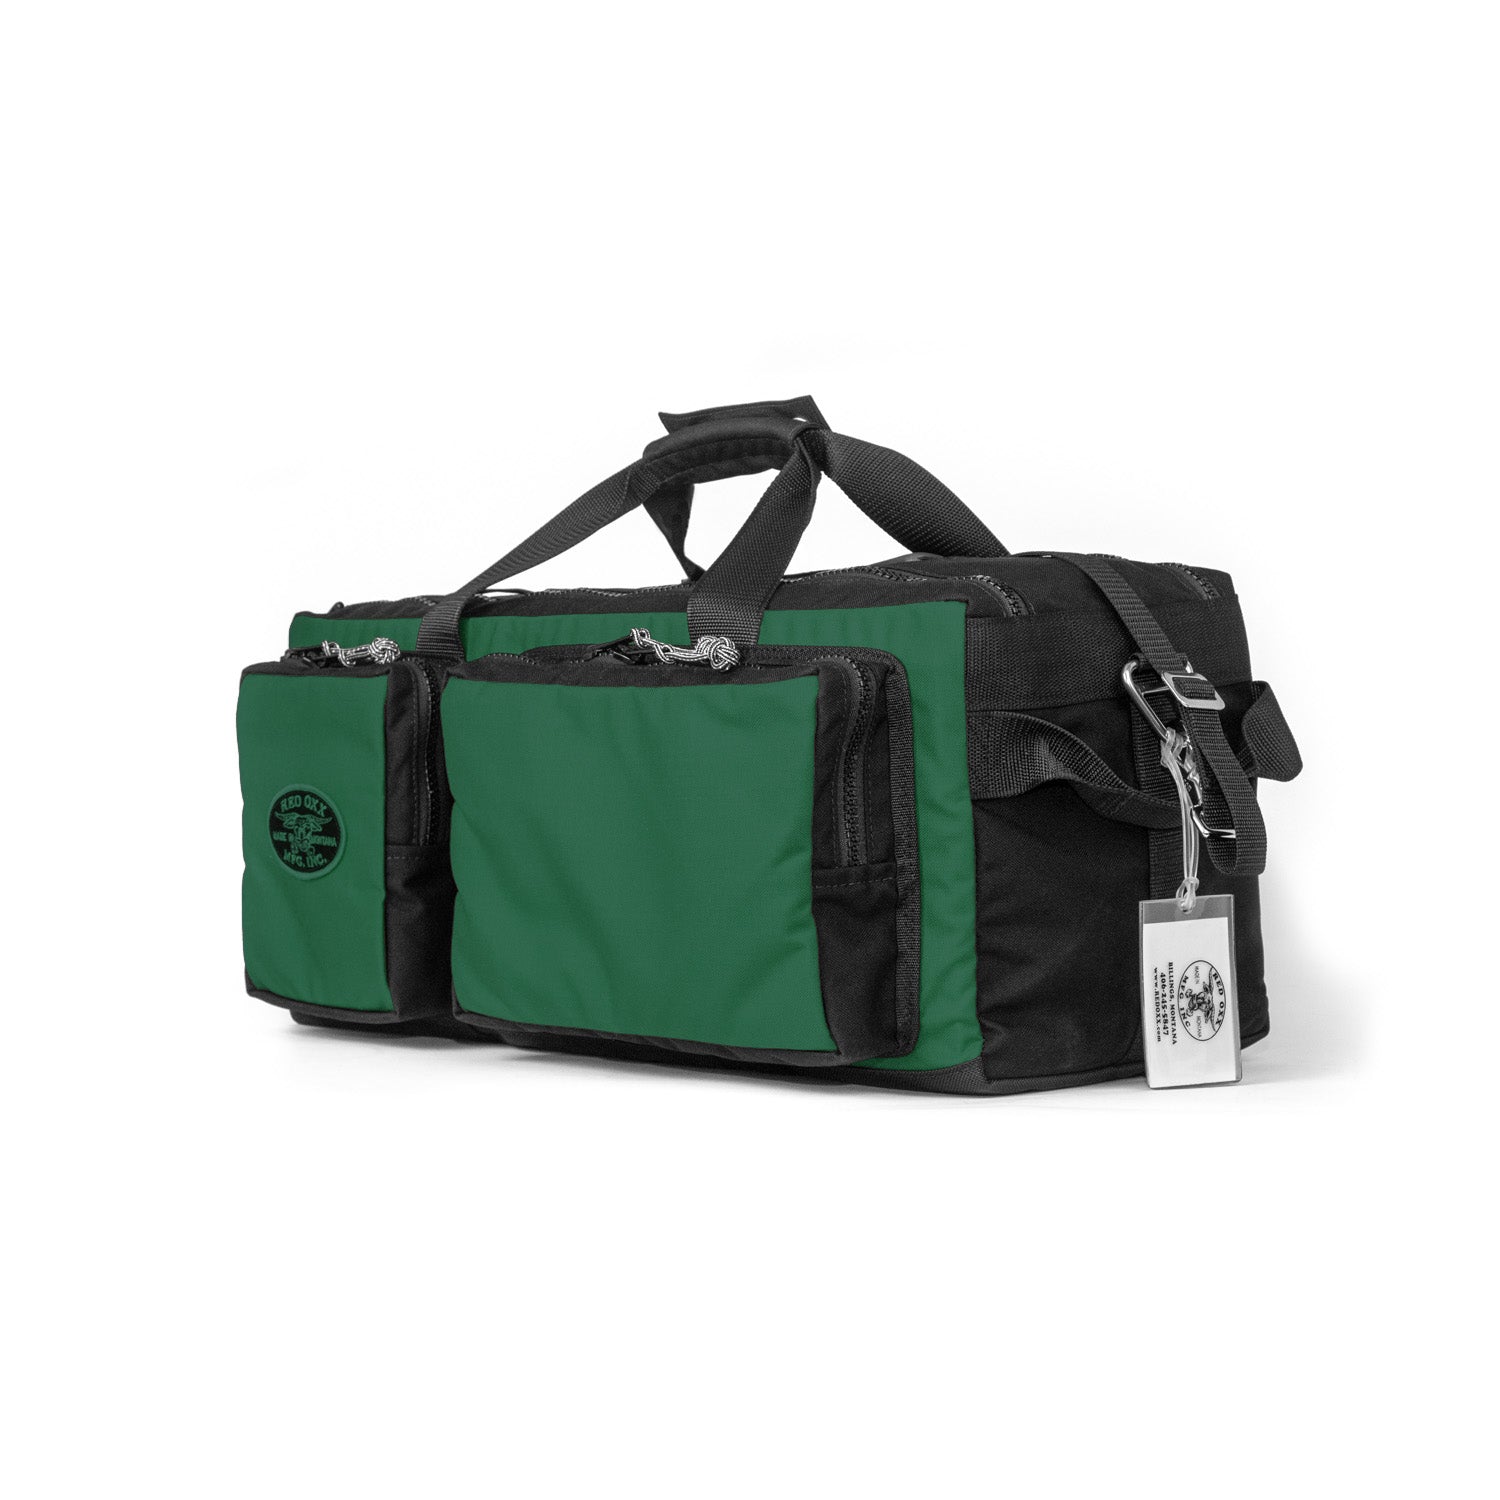 Flying Boxcar duffel with raised side pockets.  Each end has a grab loop handle.  Luggage tag and shoulder strap. 